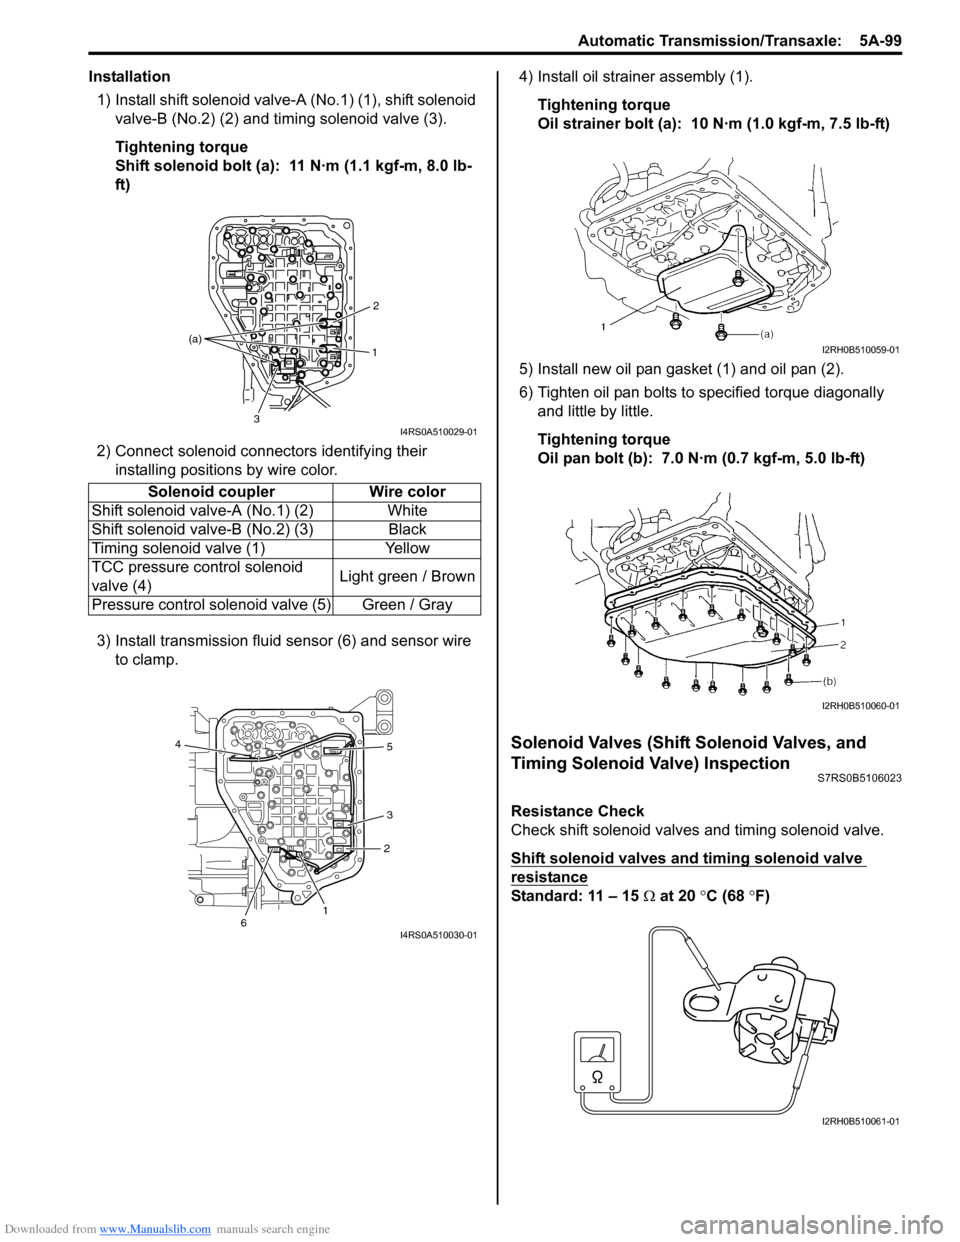 SUZUKI SWIFT 2005 2.G Service Service Manual Downloaded from www.Manualslib.com manuals search engine Automatic Transmission/Transaxle:  5A-99
Installation1) Install shift solenoid valve- A (No.1) (1), shift solenoid 
valve-B (No.2) (2) and timi